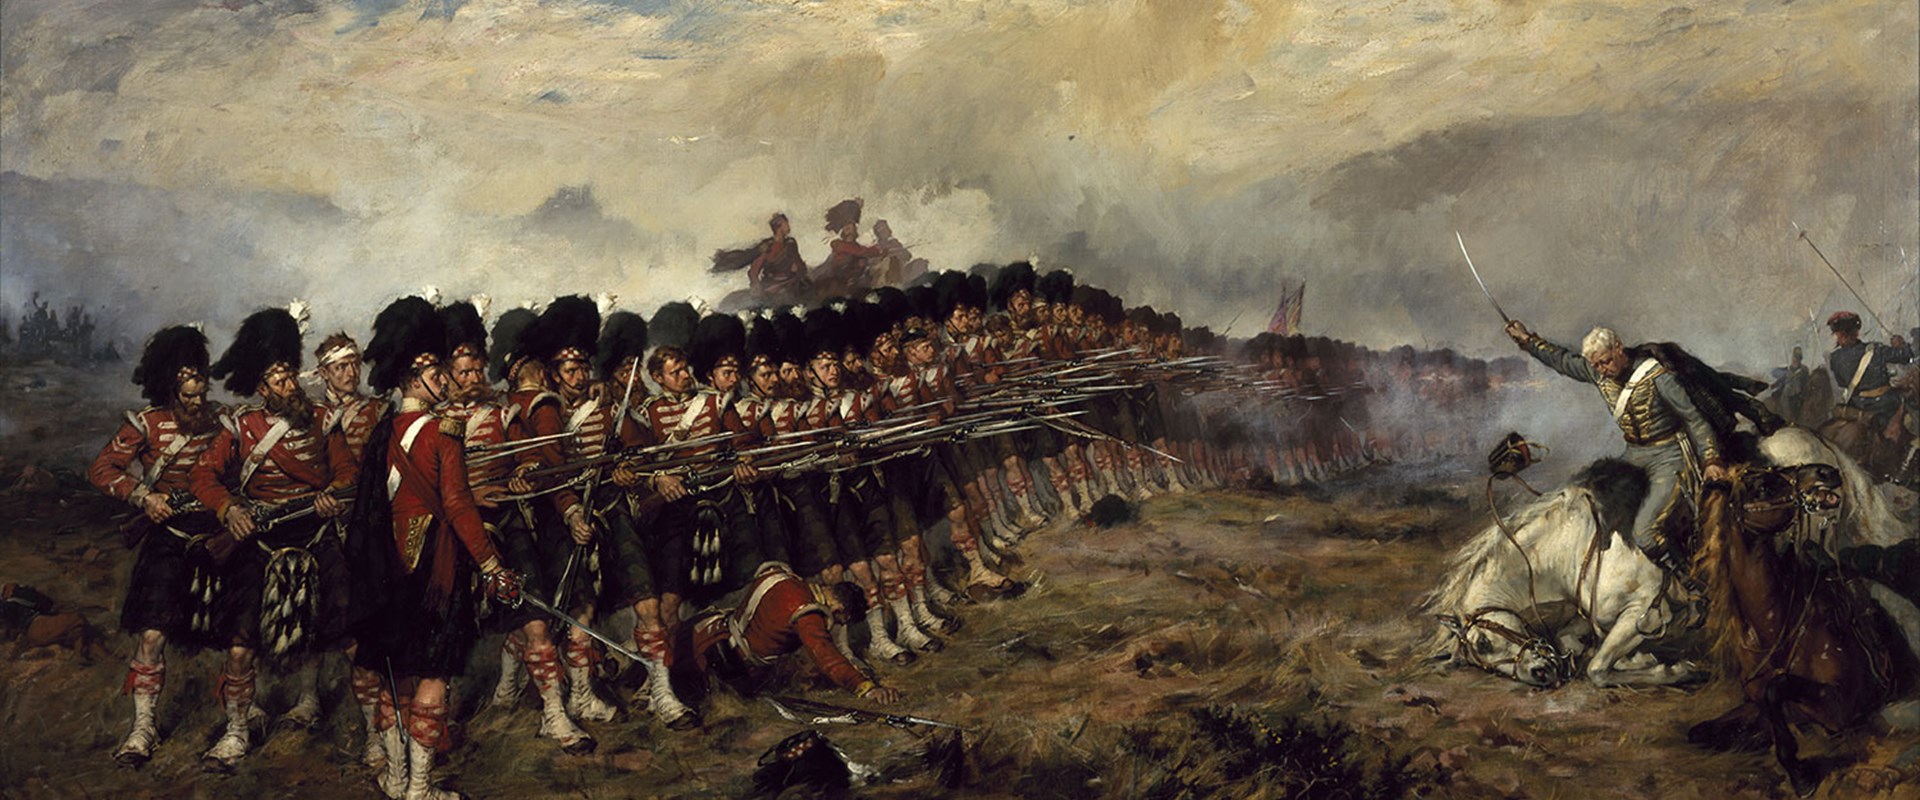 The Thin Red Line by Robert Gibb, 1881. By kind permission of Diageo, on loan to the National Museums Scotland.